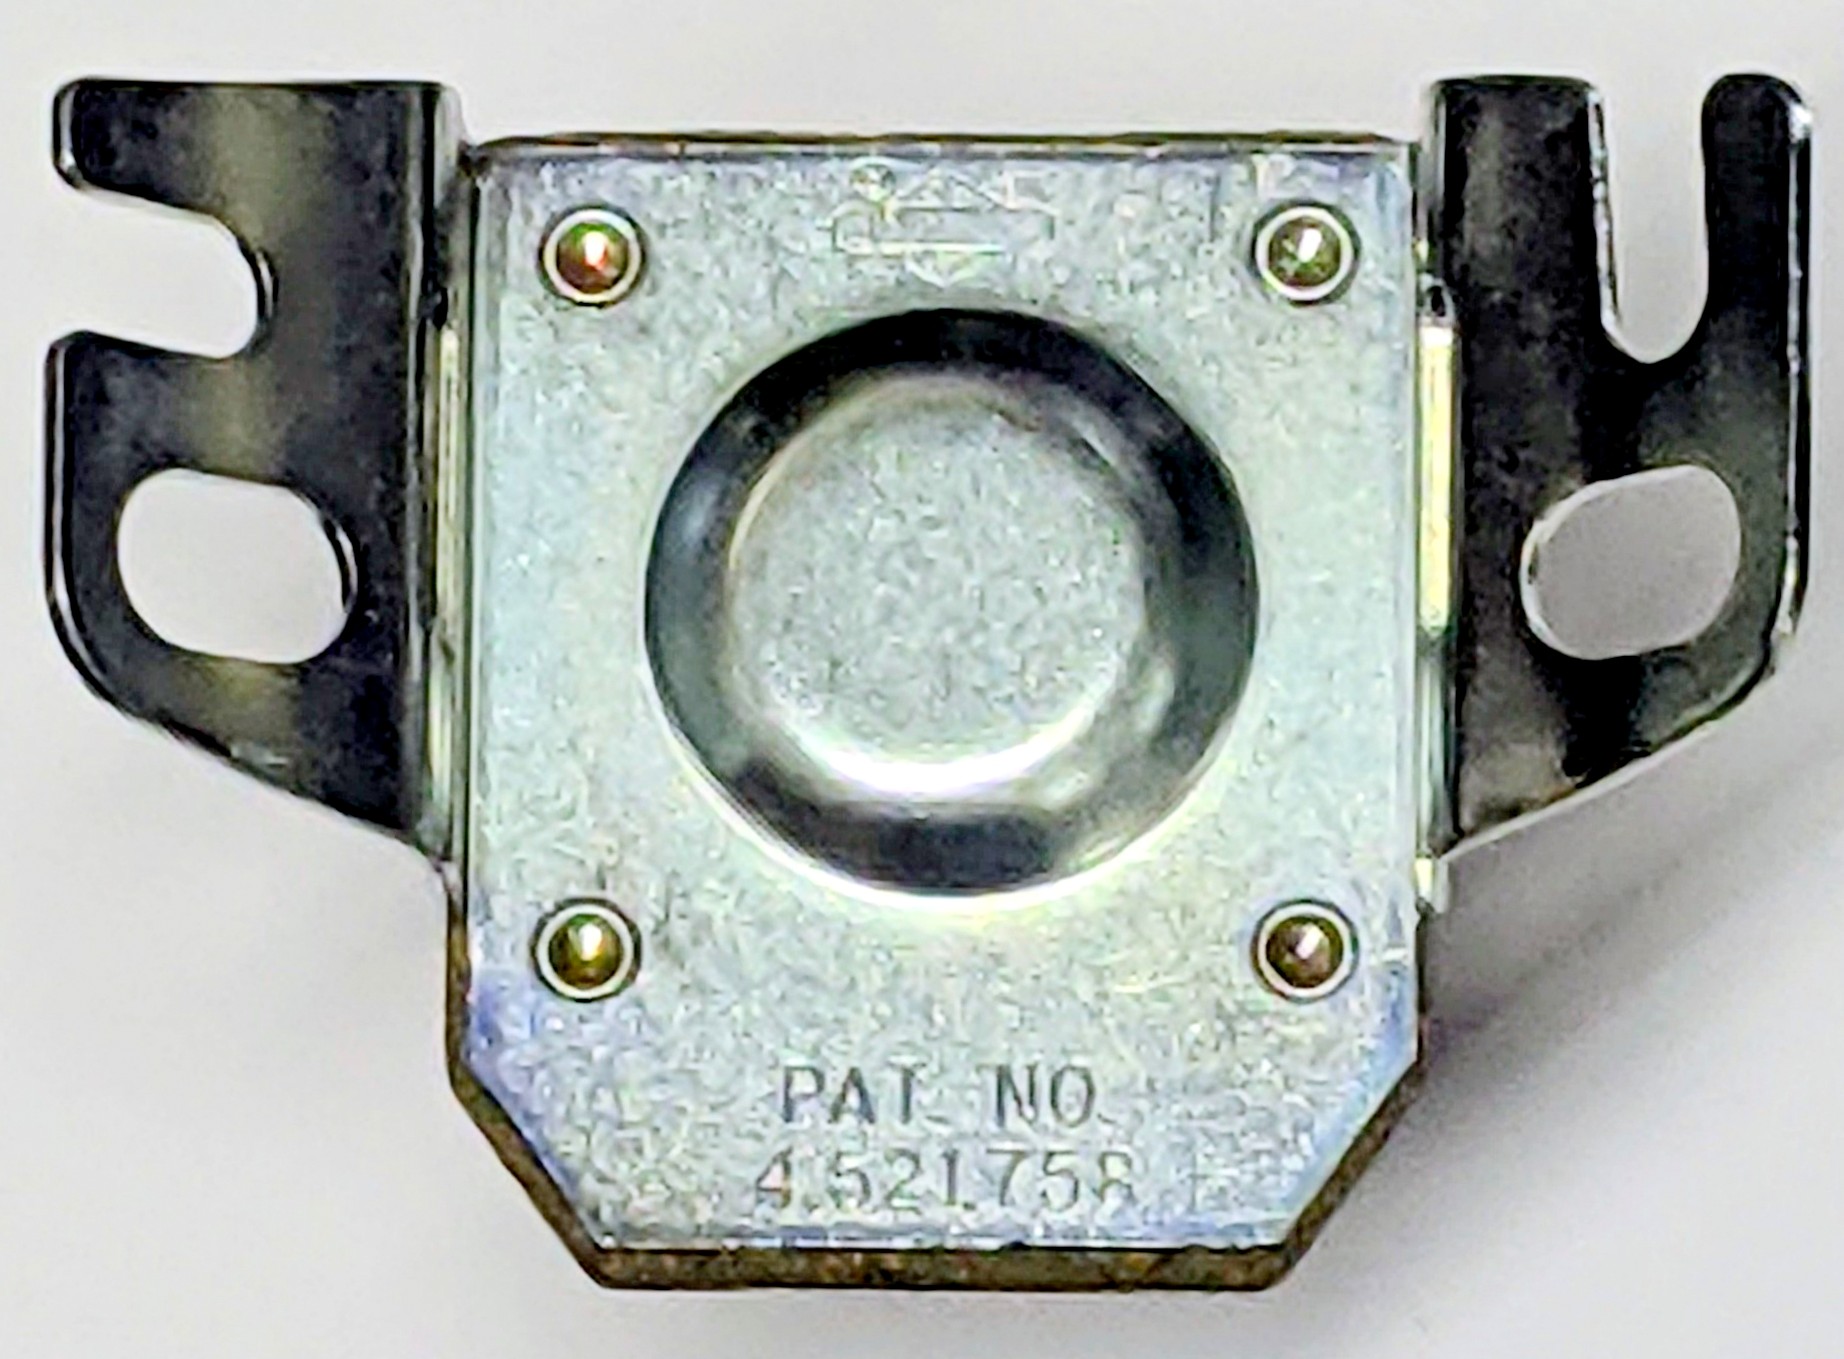 Bottom view of 812-1201-211-06